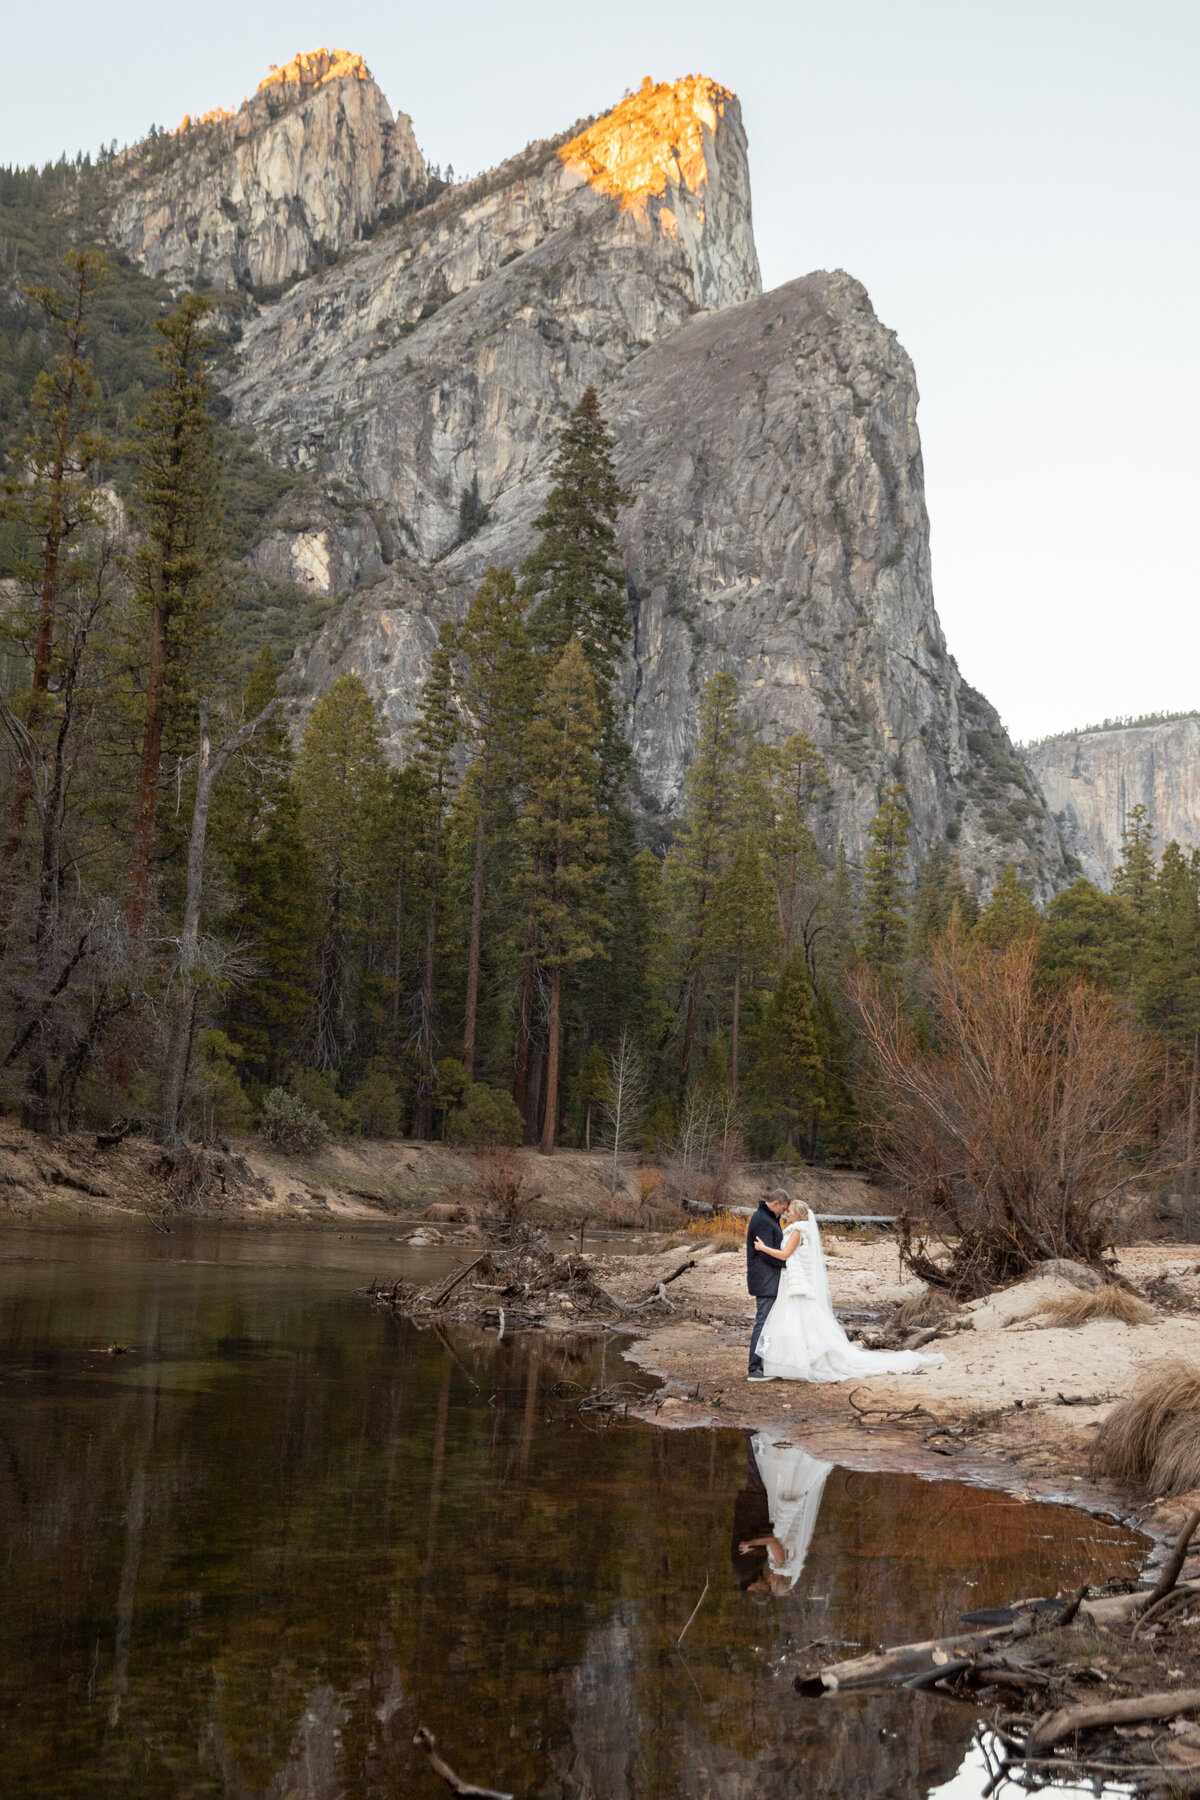 A bride and groom share their first dance on a beach in Yosemite as the mountains tower behind them.